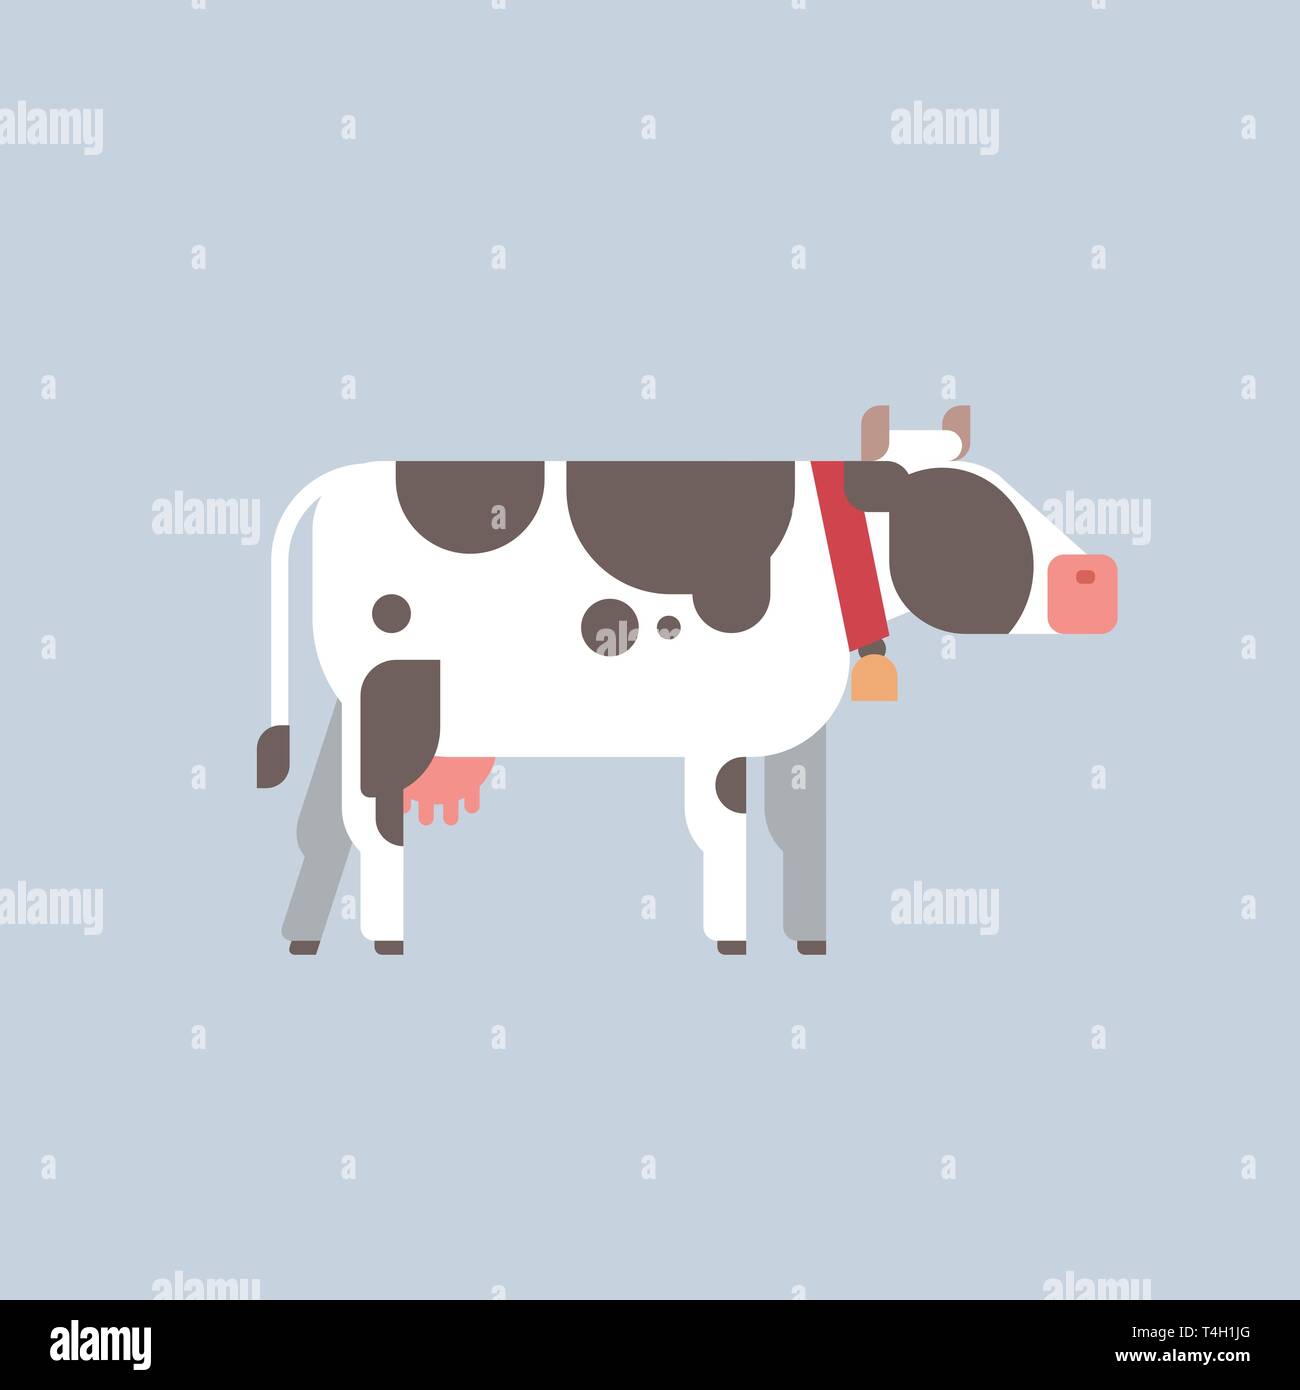 white cow with black spots farm domestic animal husbandry grazing cattle concept flat gray background Stock Vector